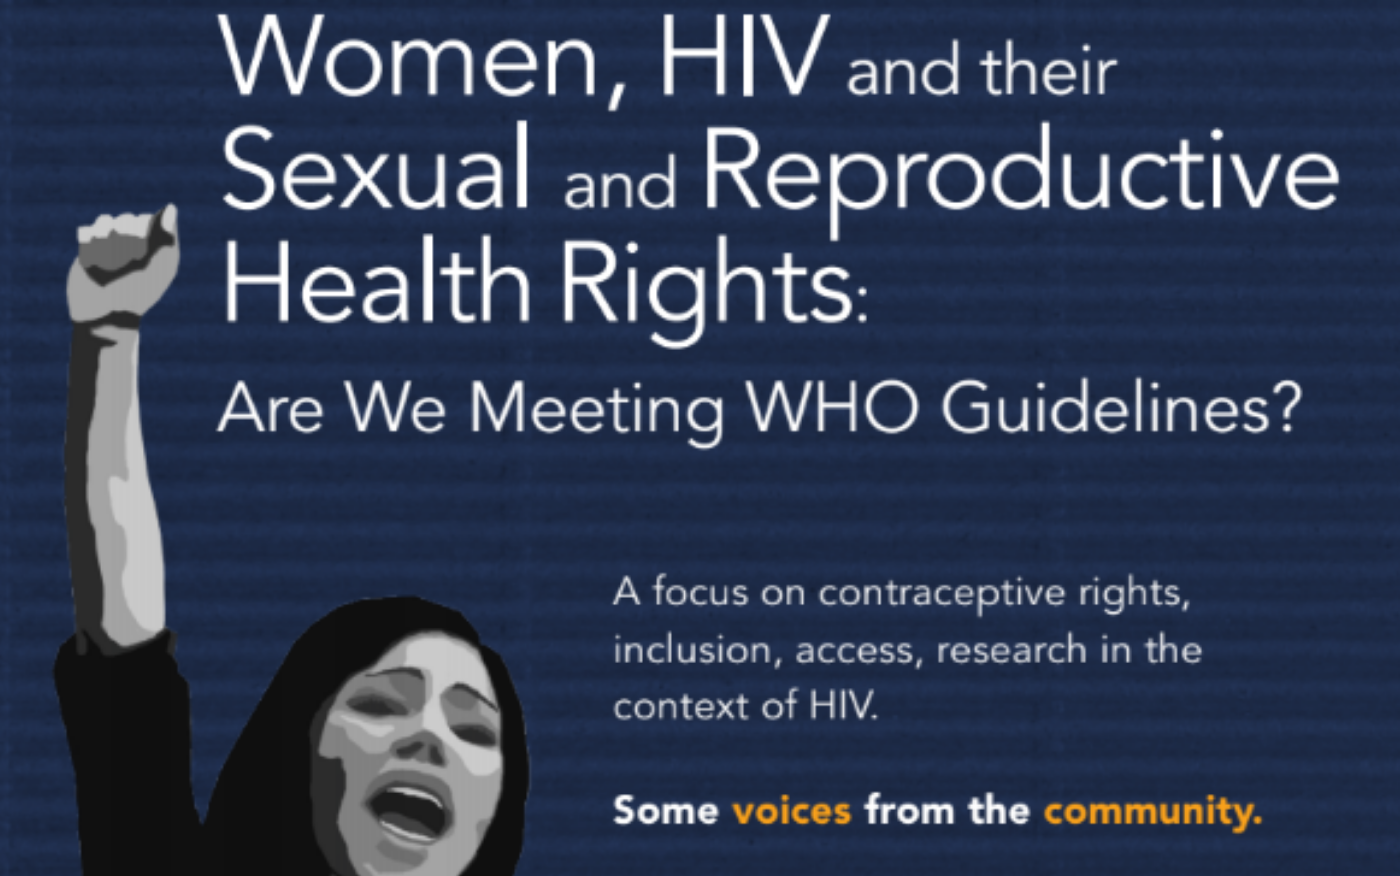 Women HIV and their reproductive rights